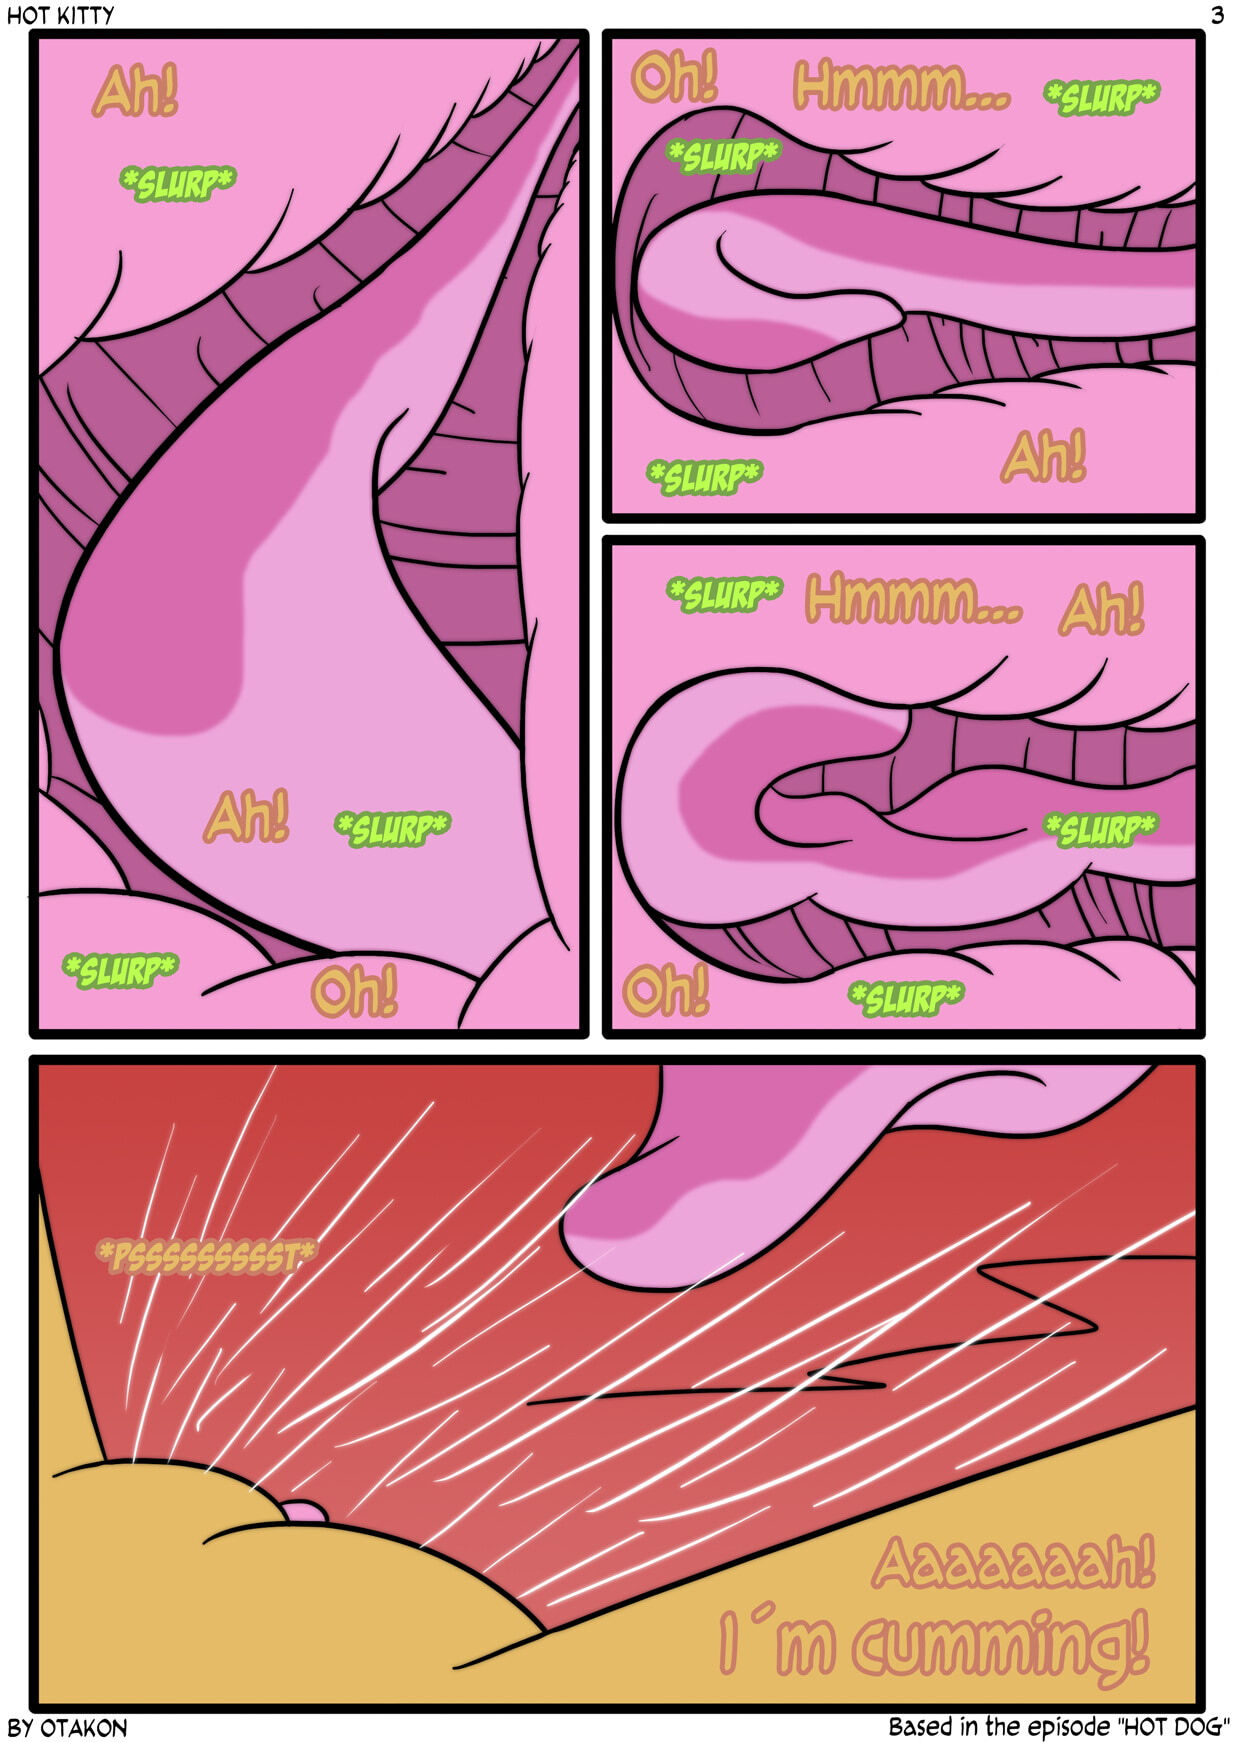 Hot Kitty - Page 9